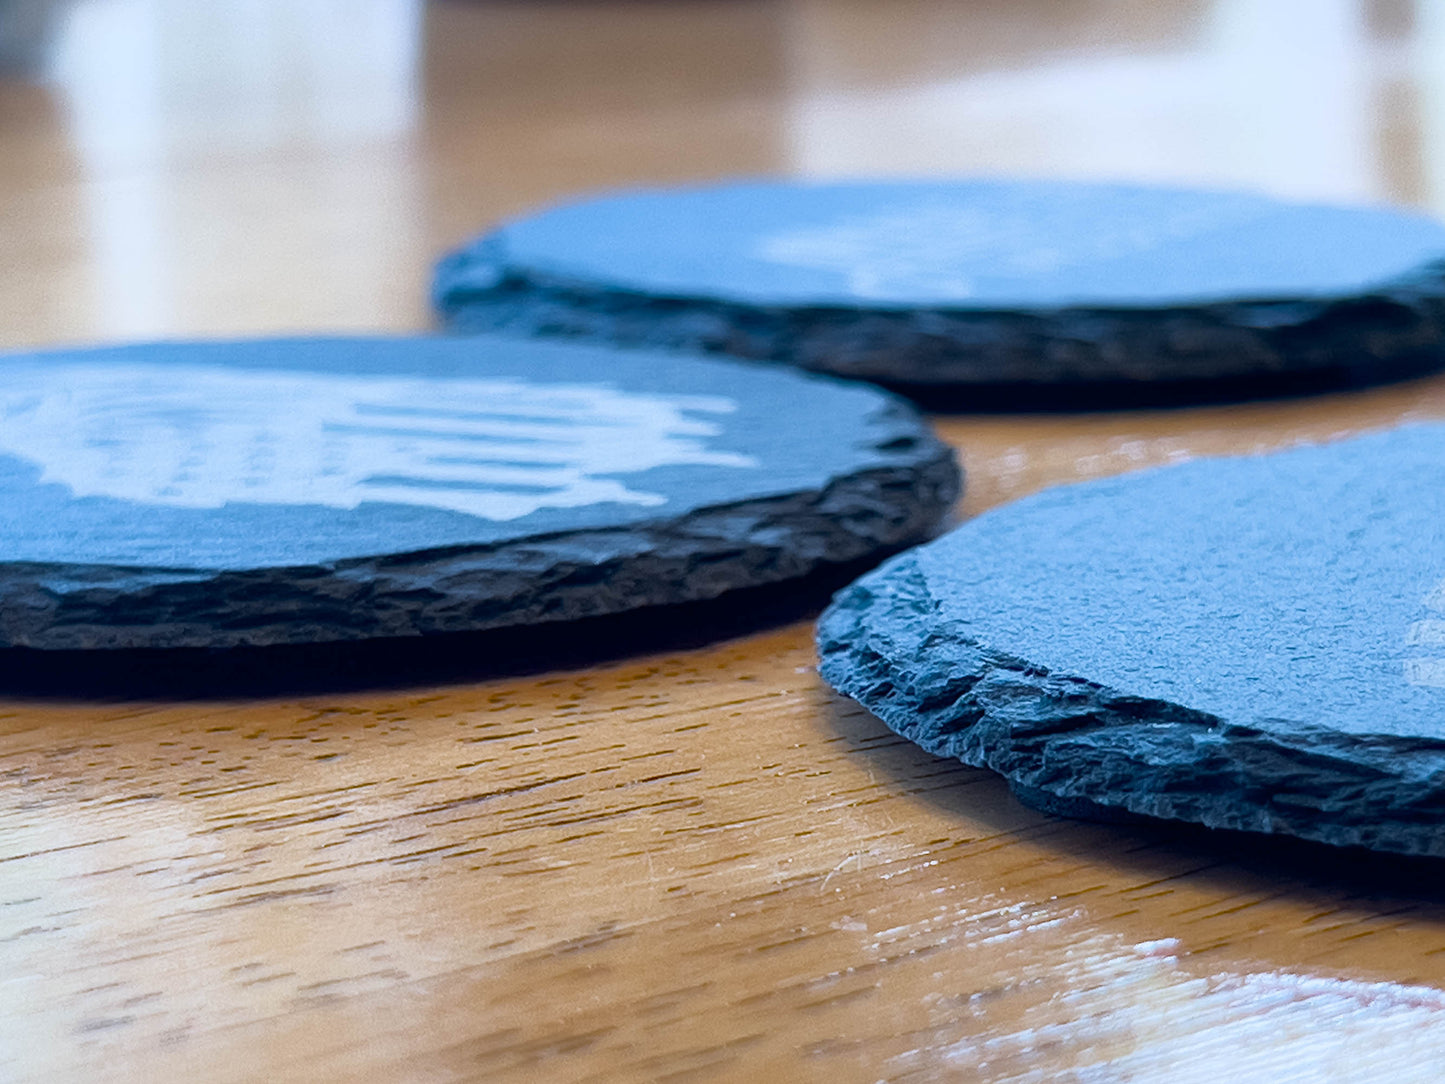 Set of 4 American-themed laser-engraved slate drink coasters